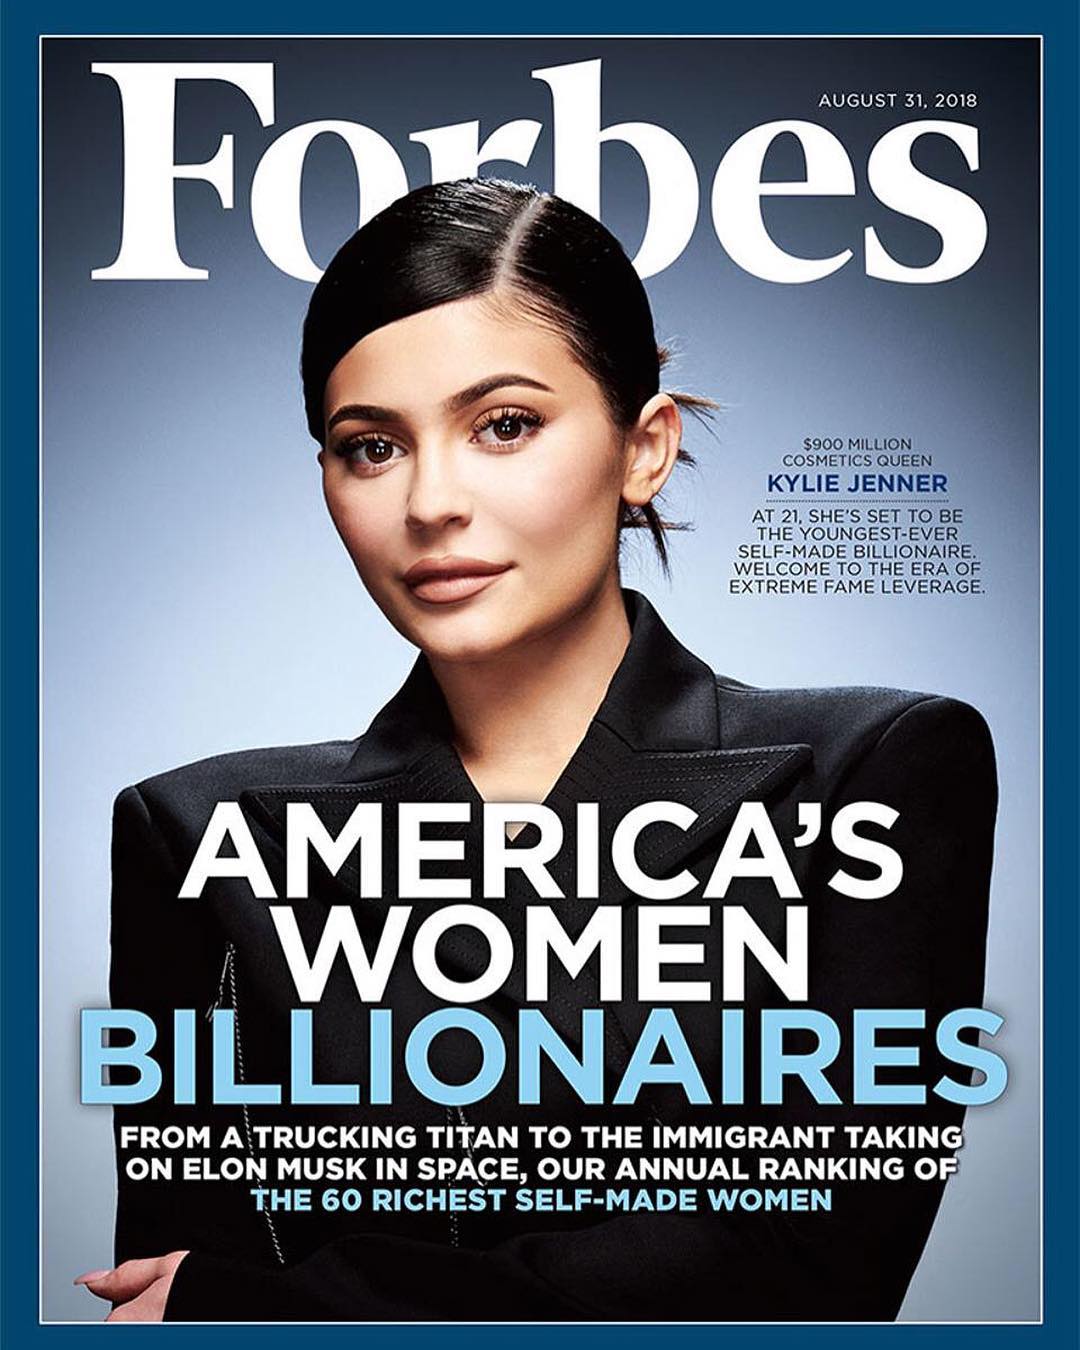 Kylie Jenner for Forbes Magazine